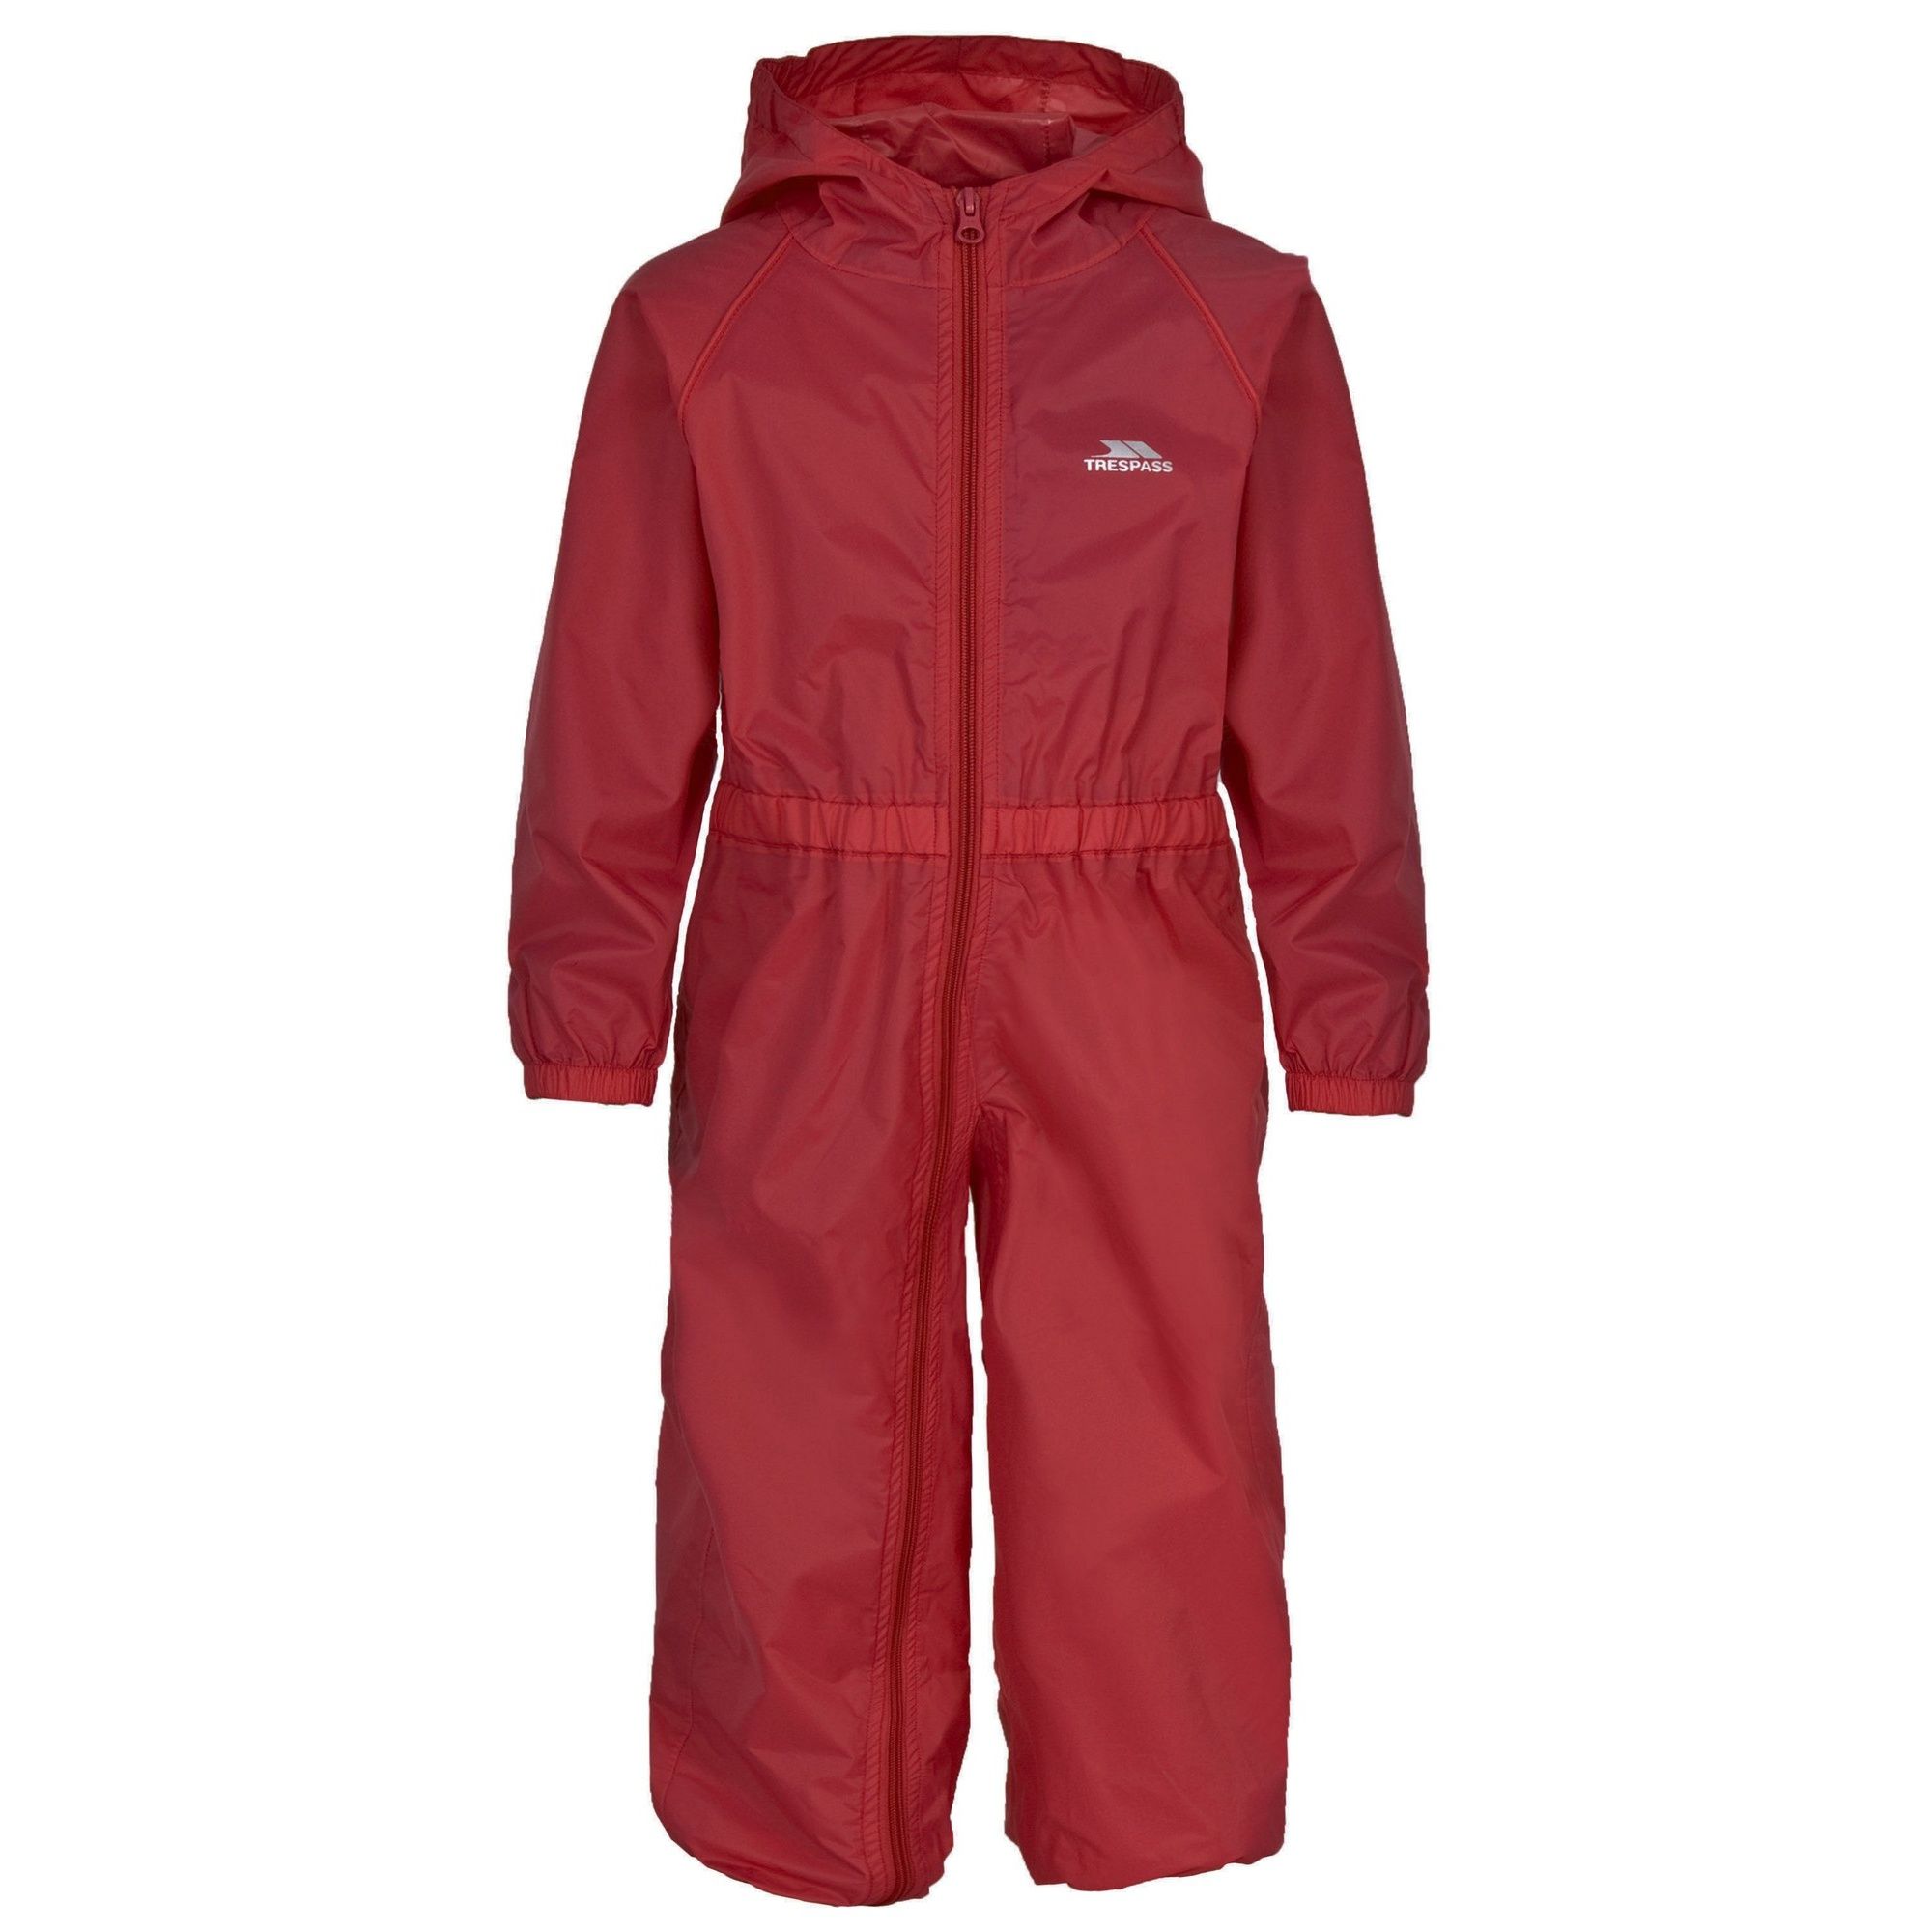 Unisex shell baby rain suit. Grown on hood. Full body length front zip. Elasticated side waist. Elasticated cuff and ankles. 100% Polyamide, PU coating.